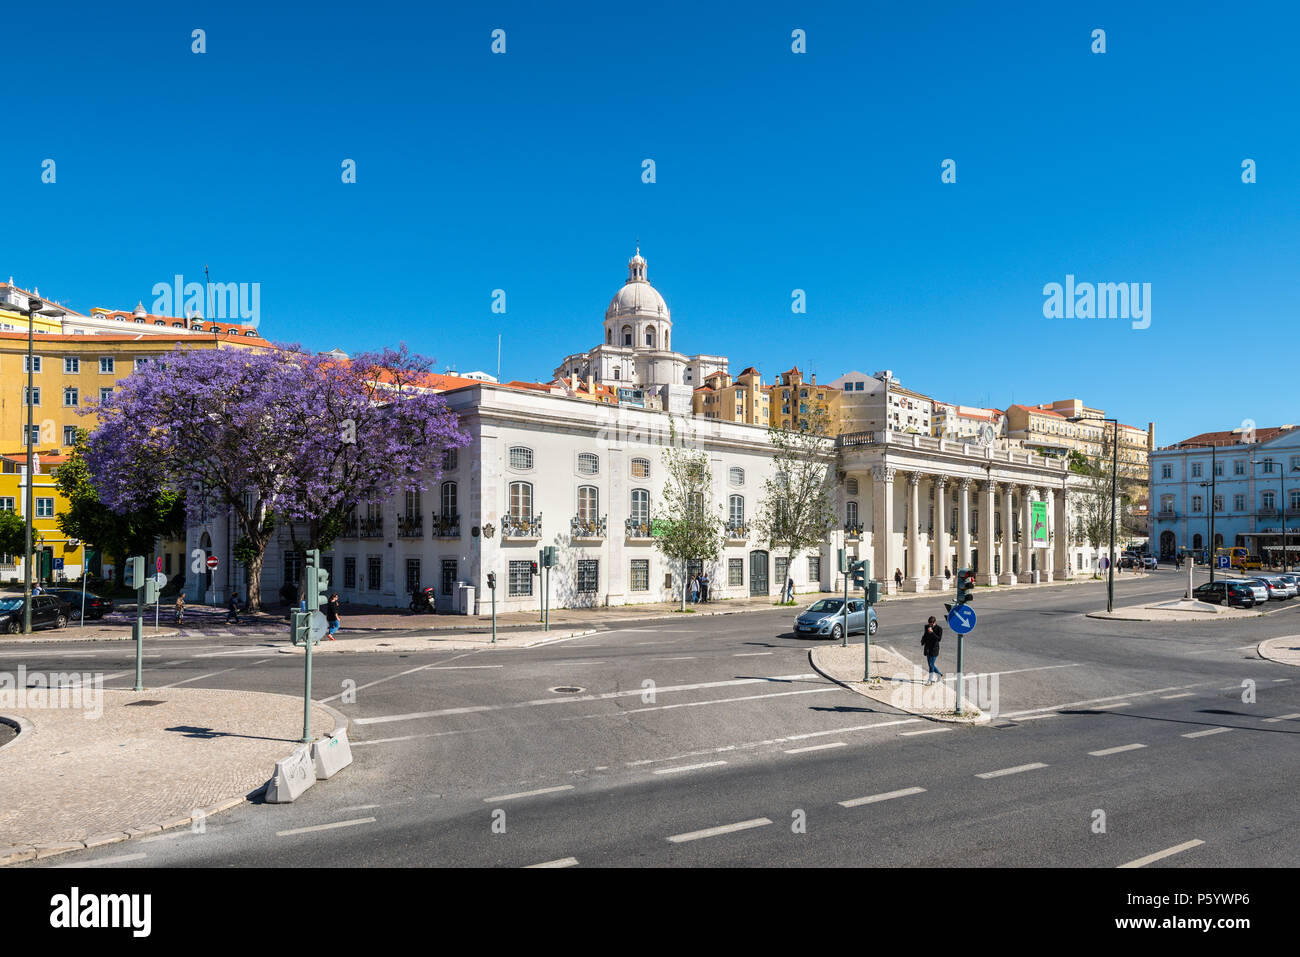 Lisbon, Portugal - May 19, 2017: View of the Military Museum (Museu Militar de Lisboa) in a springtime day in Lisbon, Portugal. Stock Photo